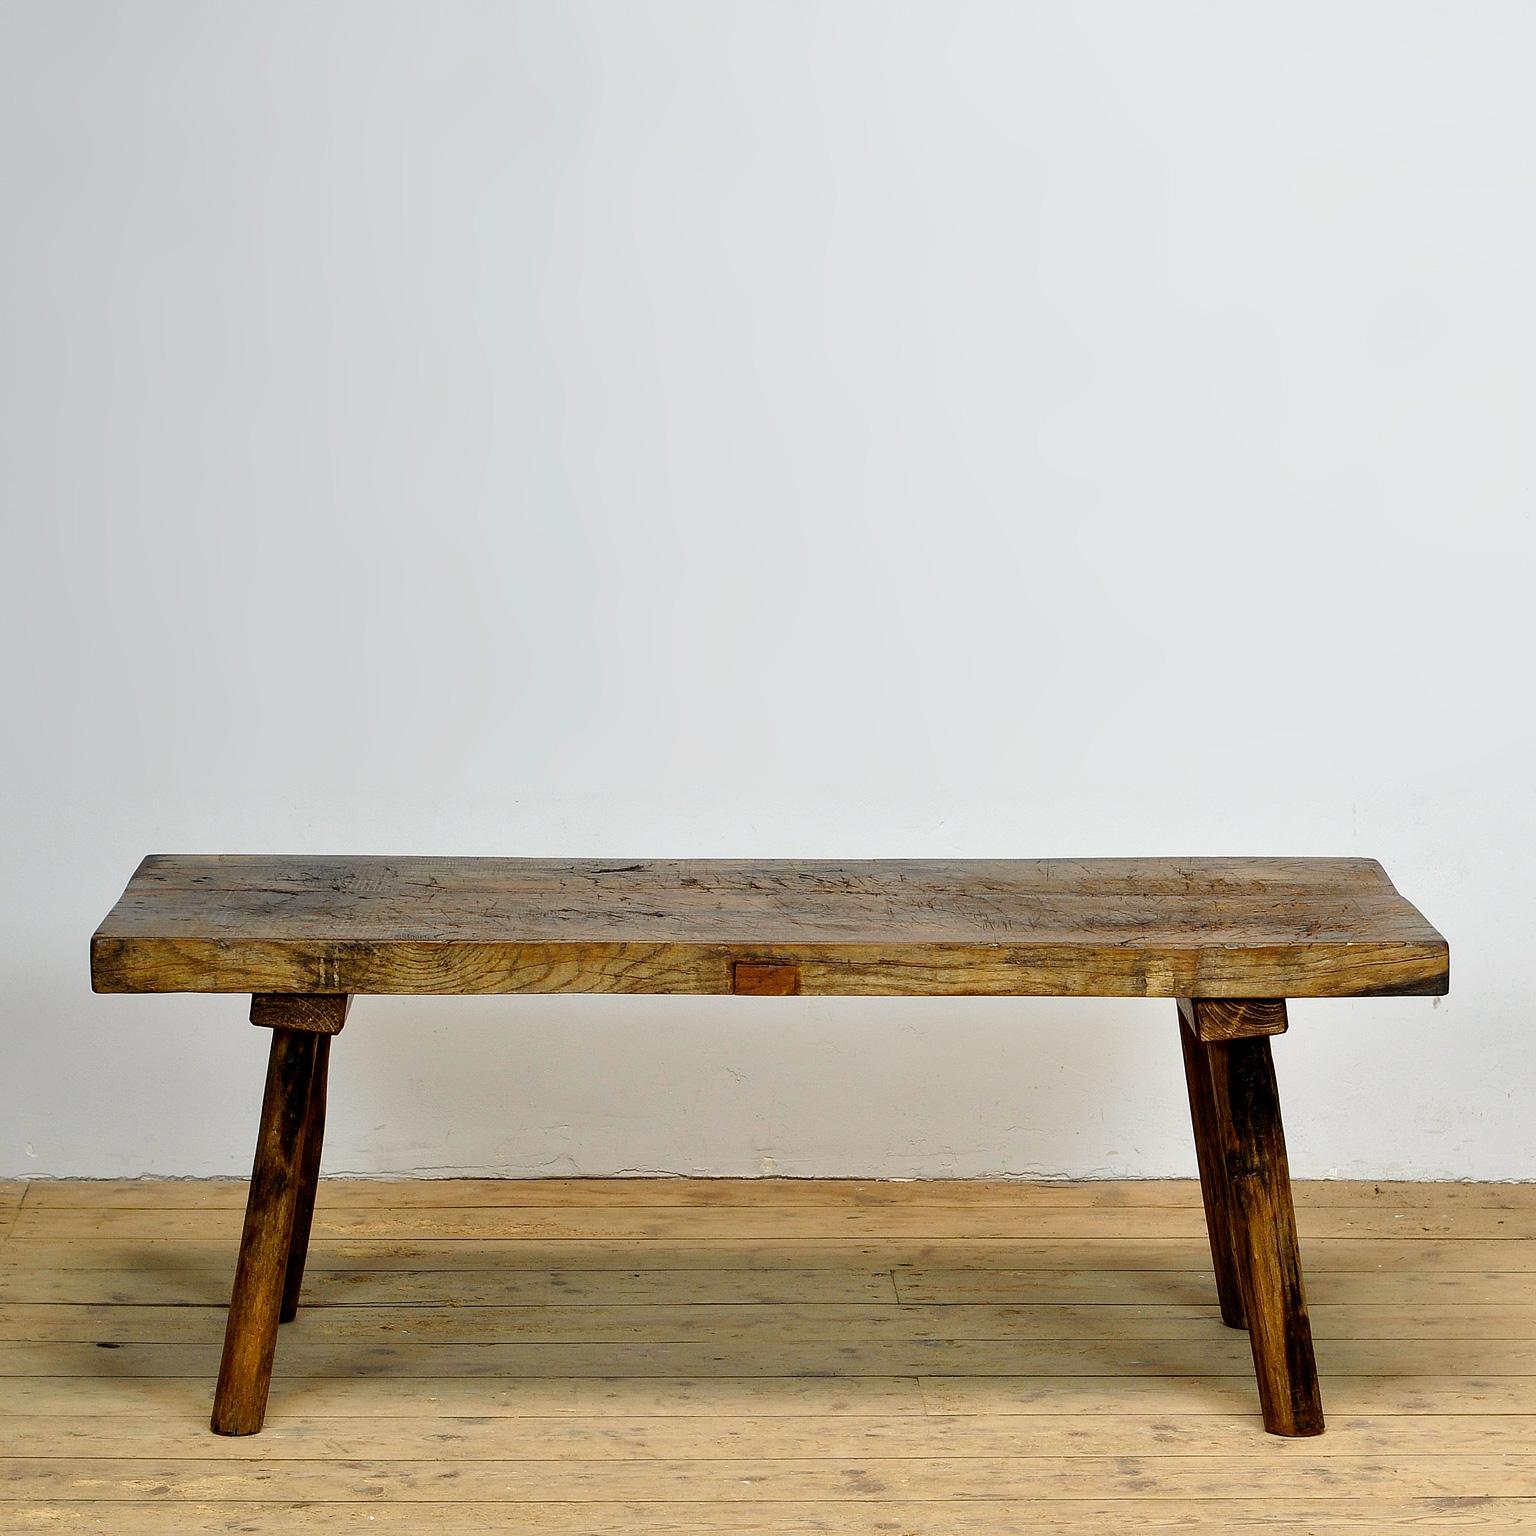 This oak butcher's farm table was produced in hungary around the 1930s. With an oak top of 5 cm thick. The legs are shortened to the ideal height for a coffee table or bench. Treated for woodworm. 